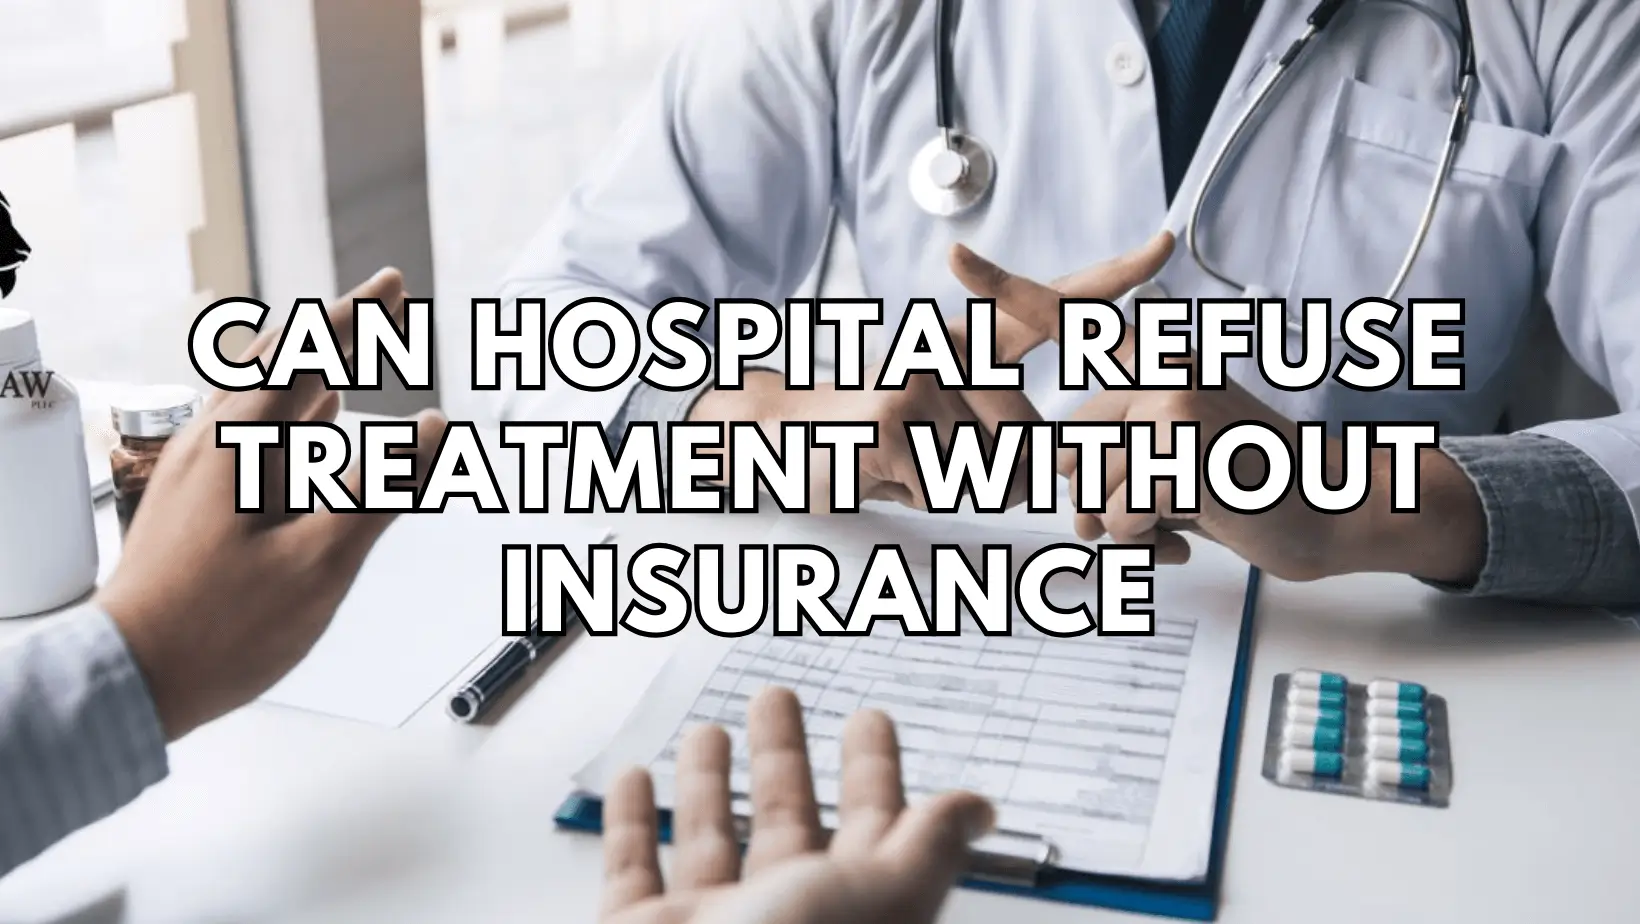 can hospital refuse treatment without insurance featured image